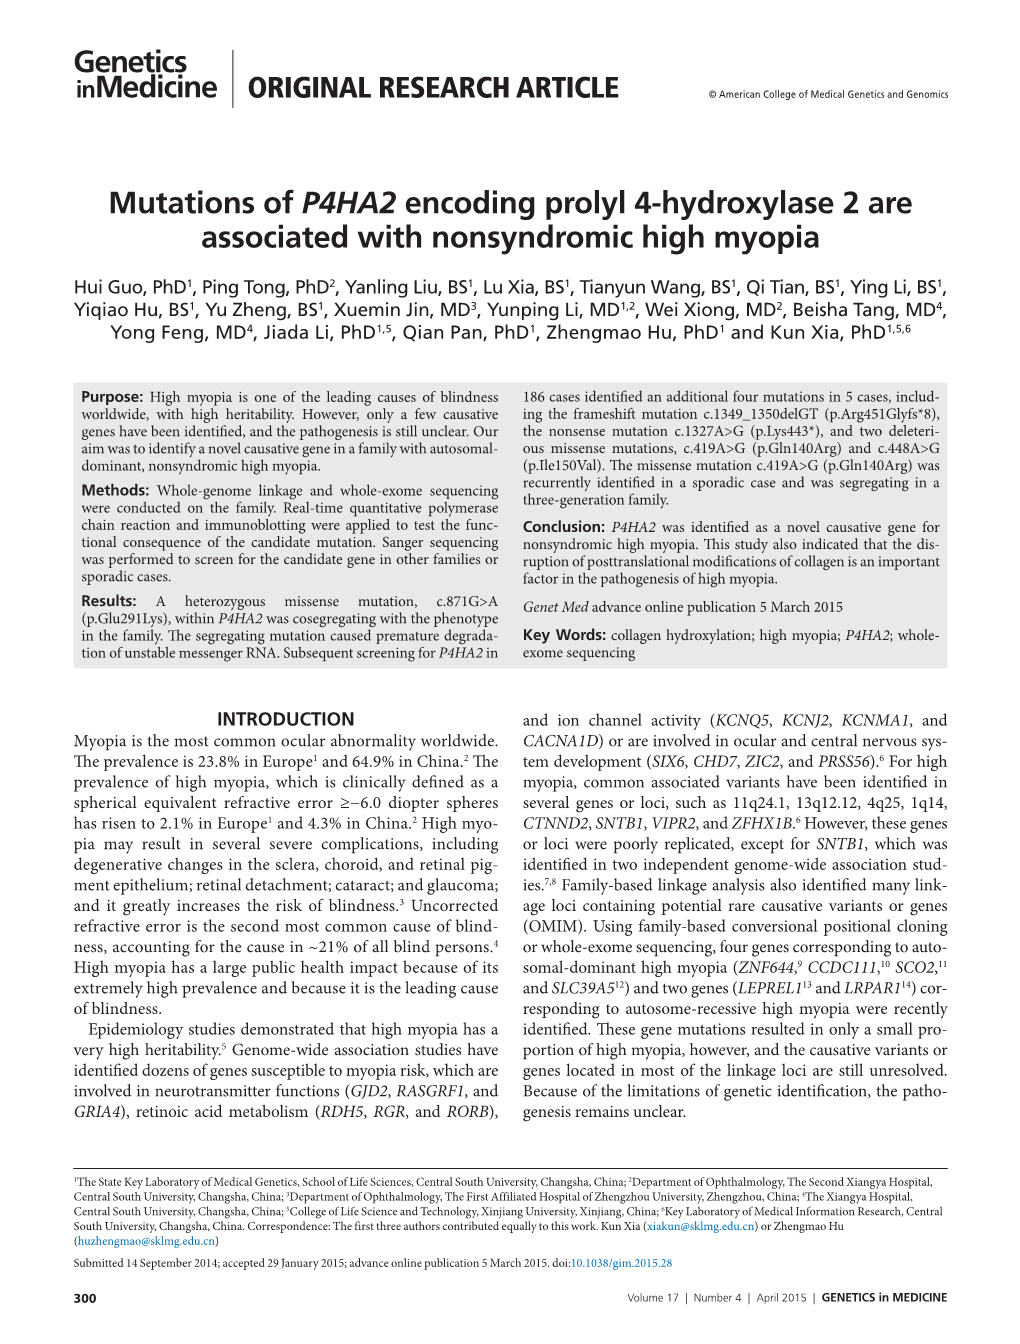 Mutations of P4HA2 Encoding Prolyl 4-Hydroxylase 2 Are Associated with Nonsyndromic High Myopia